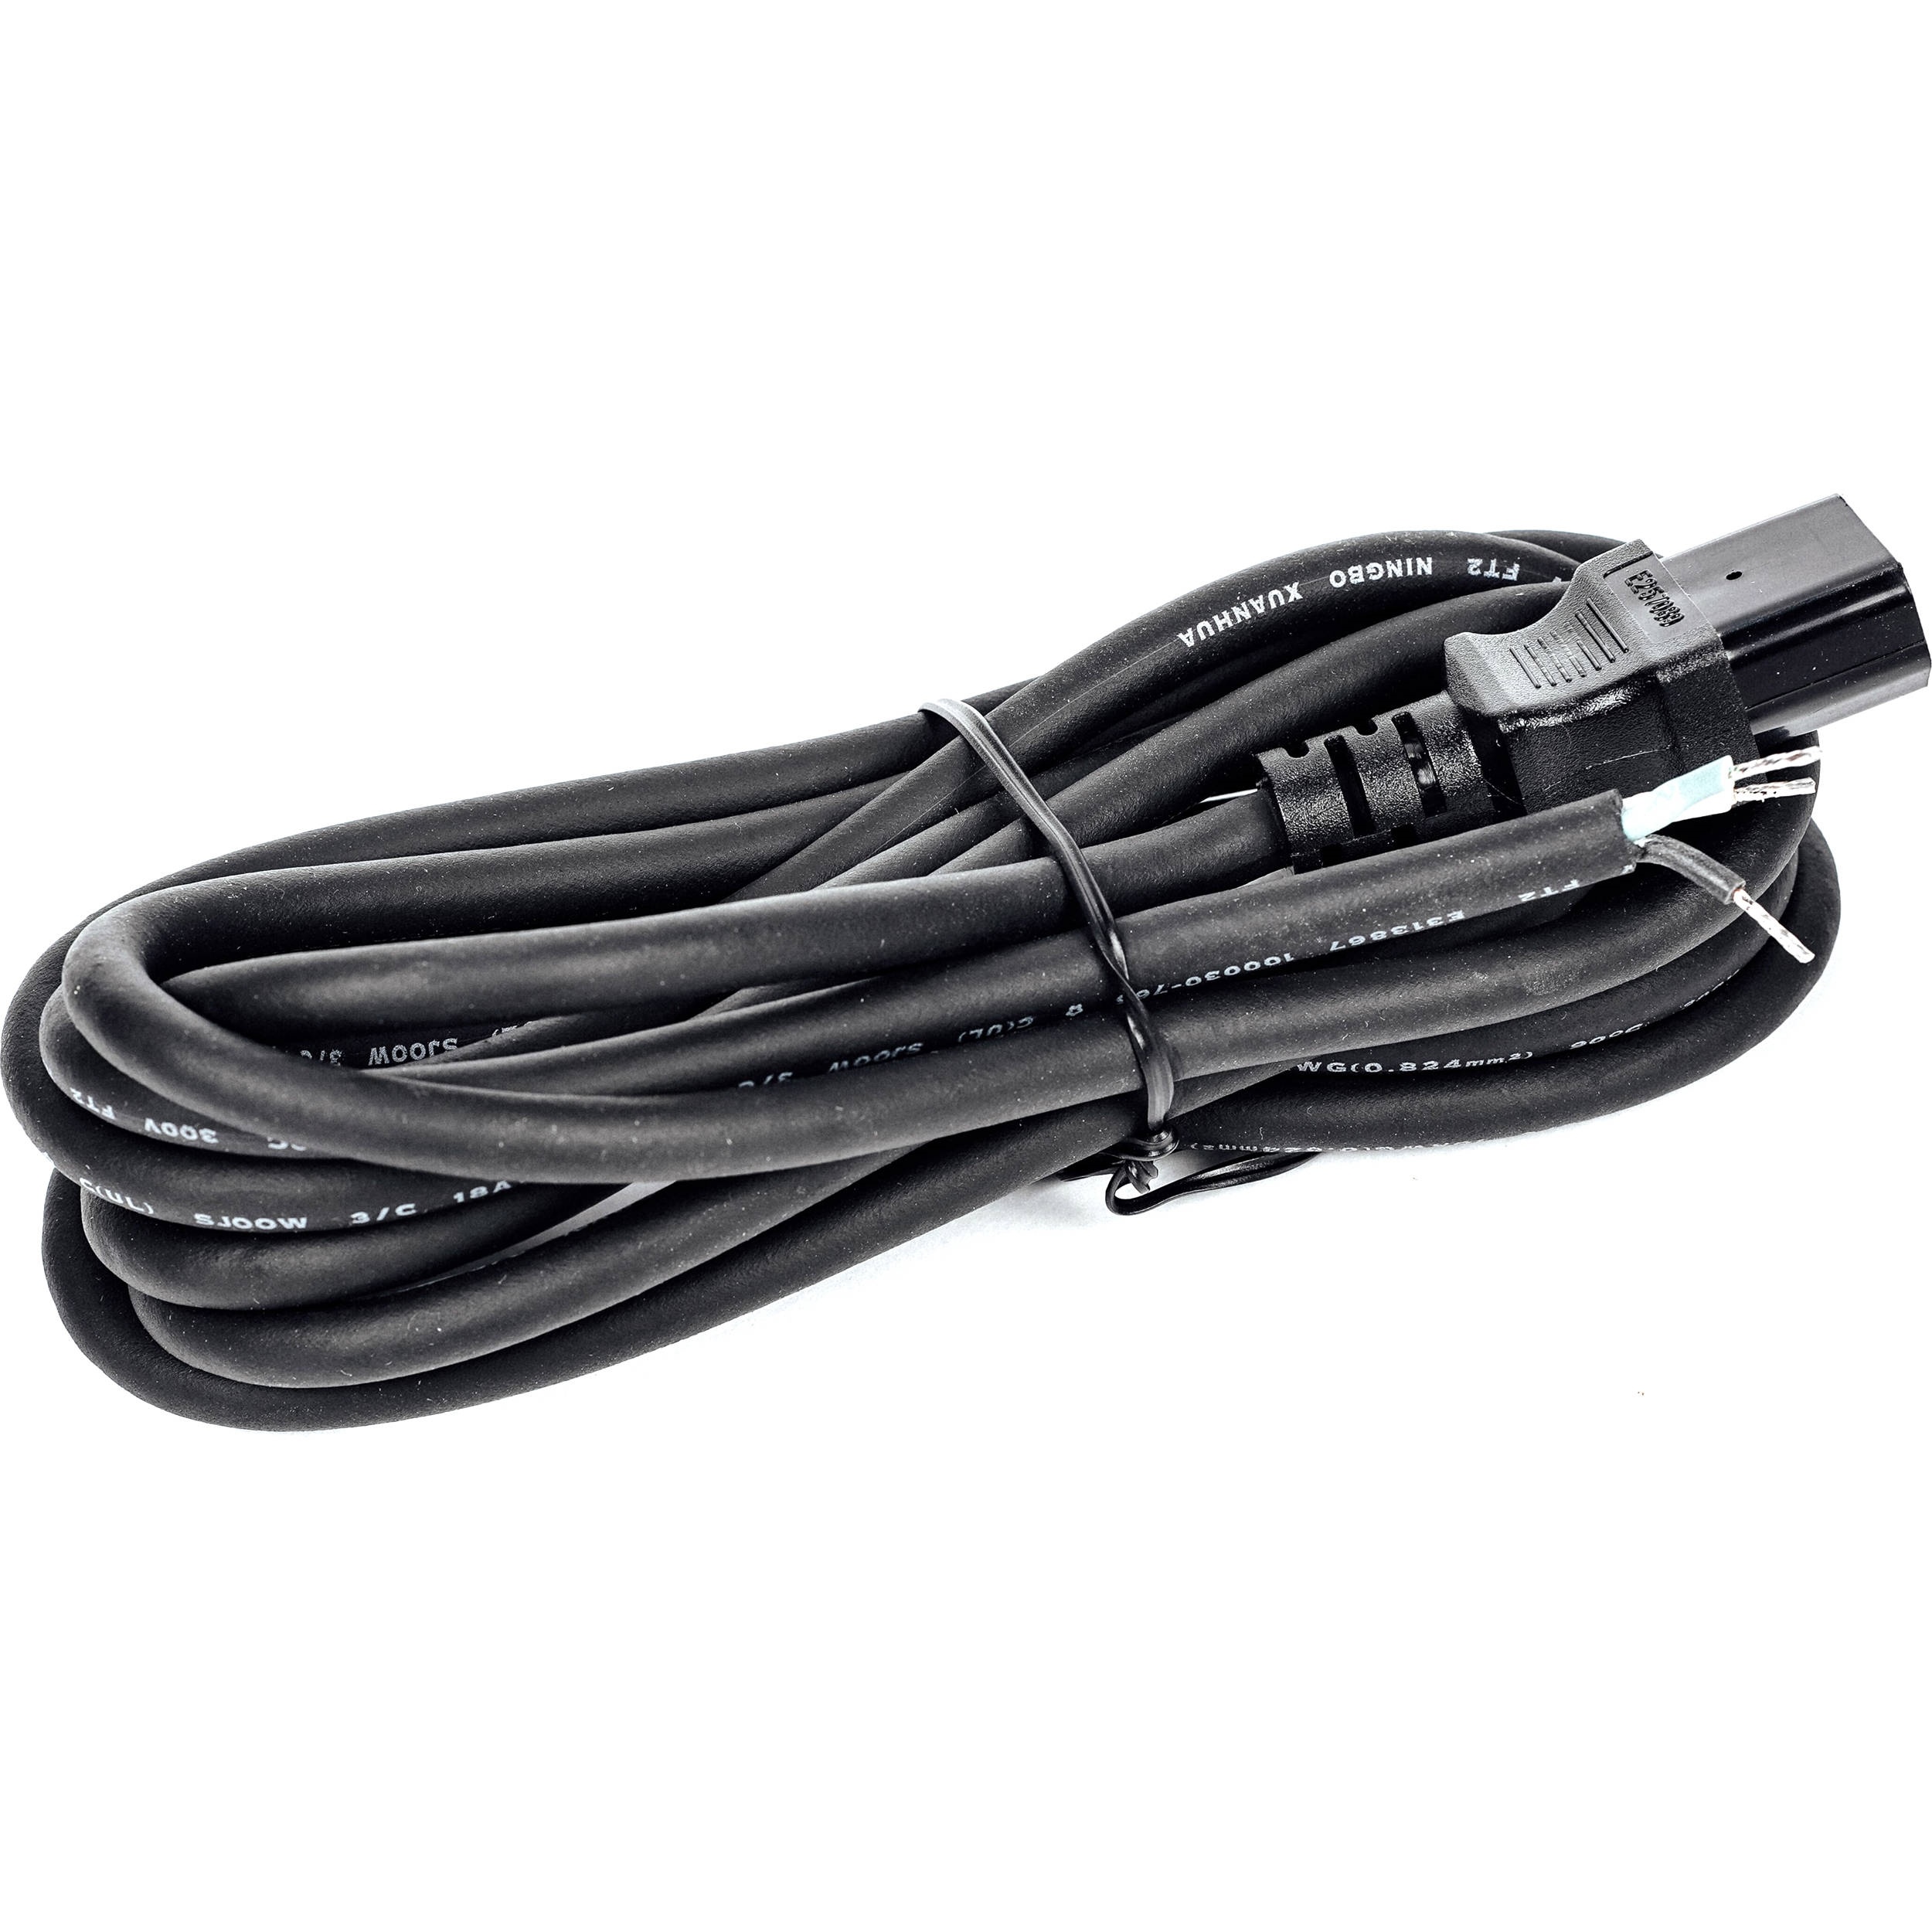 Litepanels IEC AC Power Cable Assembly (3m, EU Safety-Rated Bare Ends)